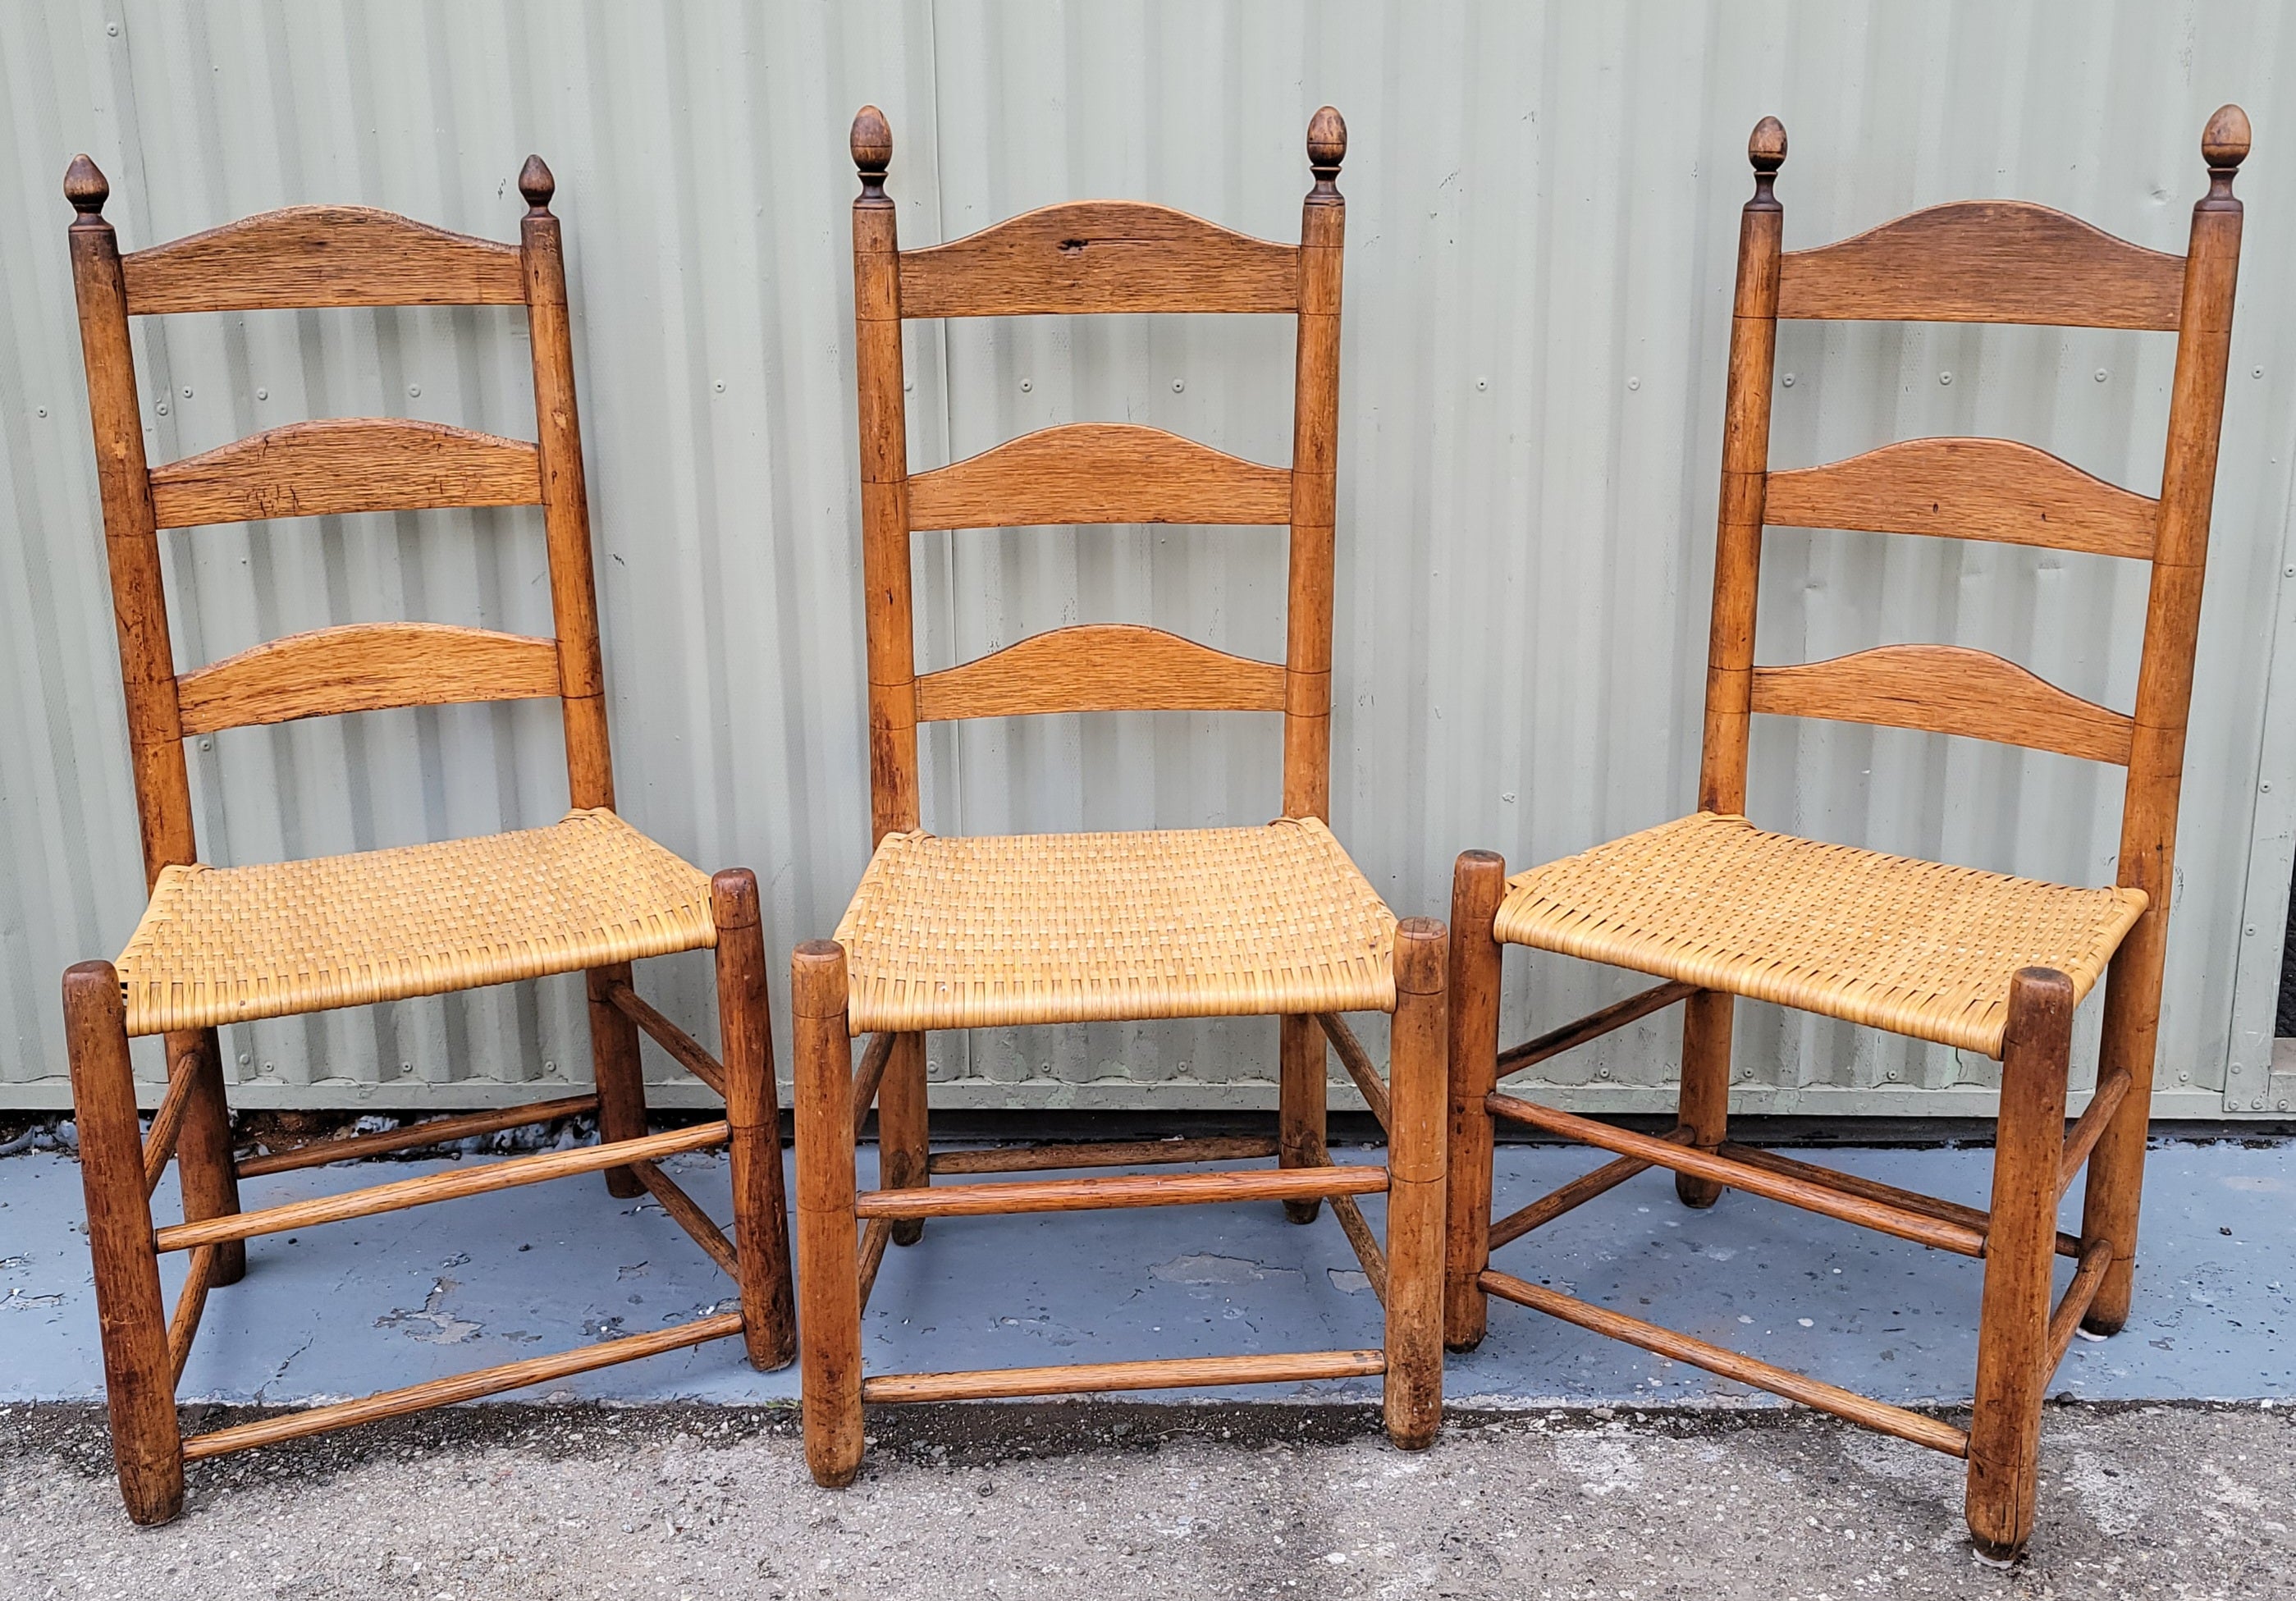 19thc Ladder Back Chairs From Pennsylvania -Set of Three For Sale